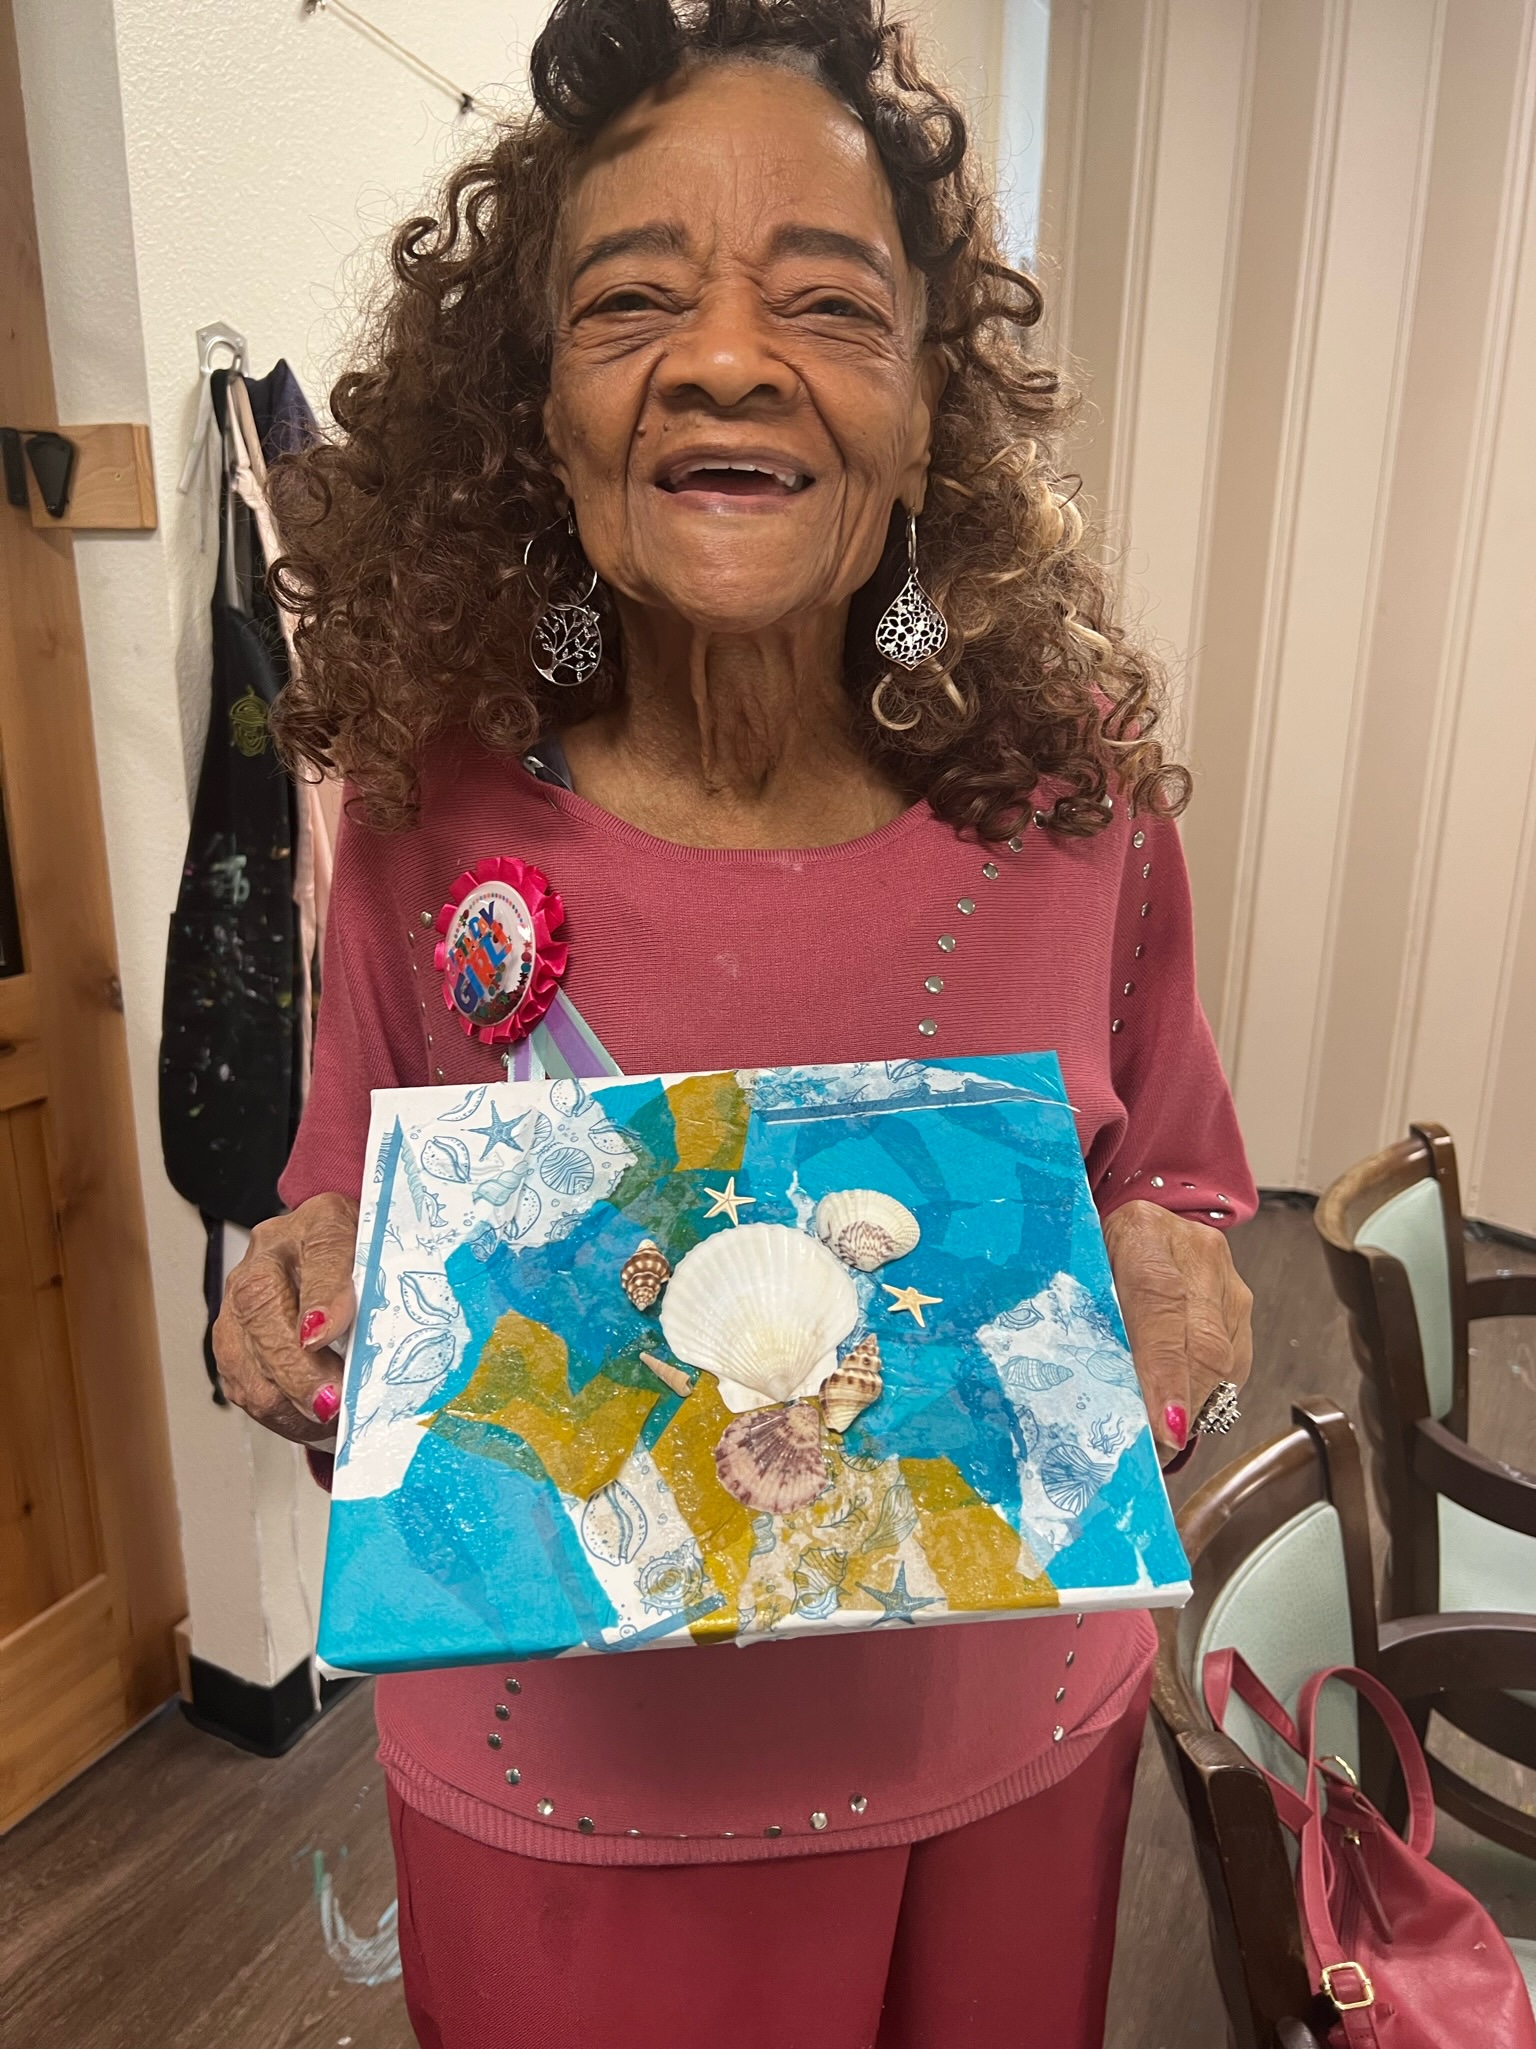 seniors with dementia channel the artist within at Oakwood Creative Care Adult Day Clubs